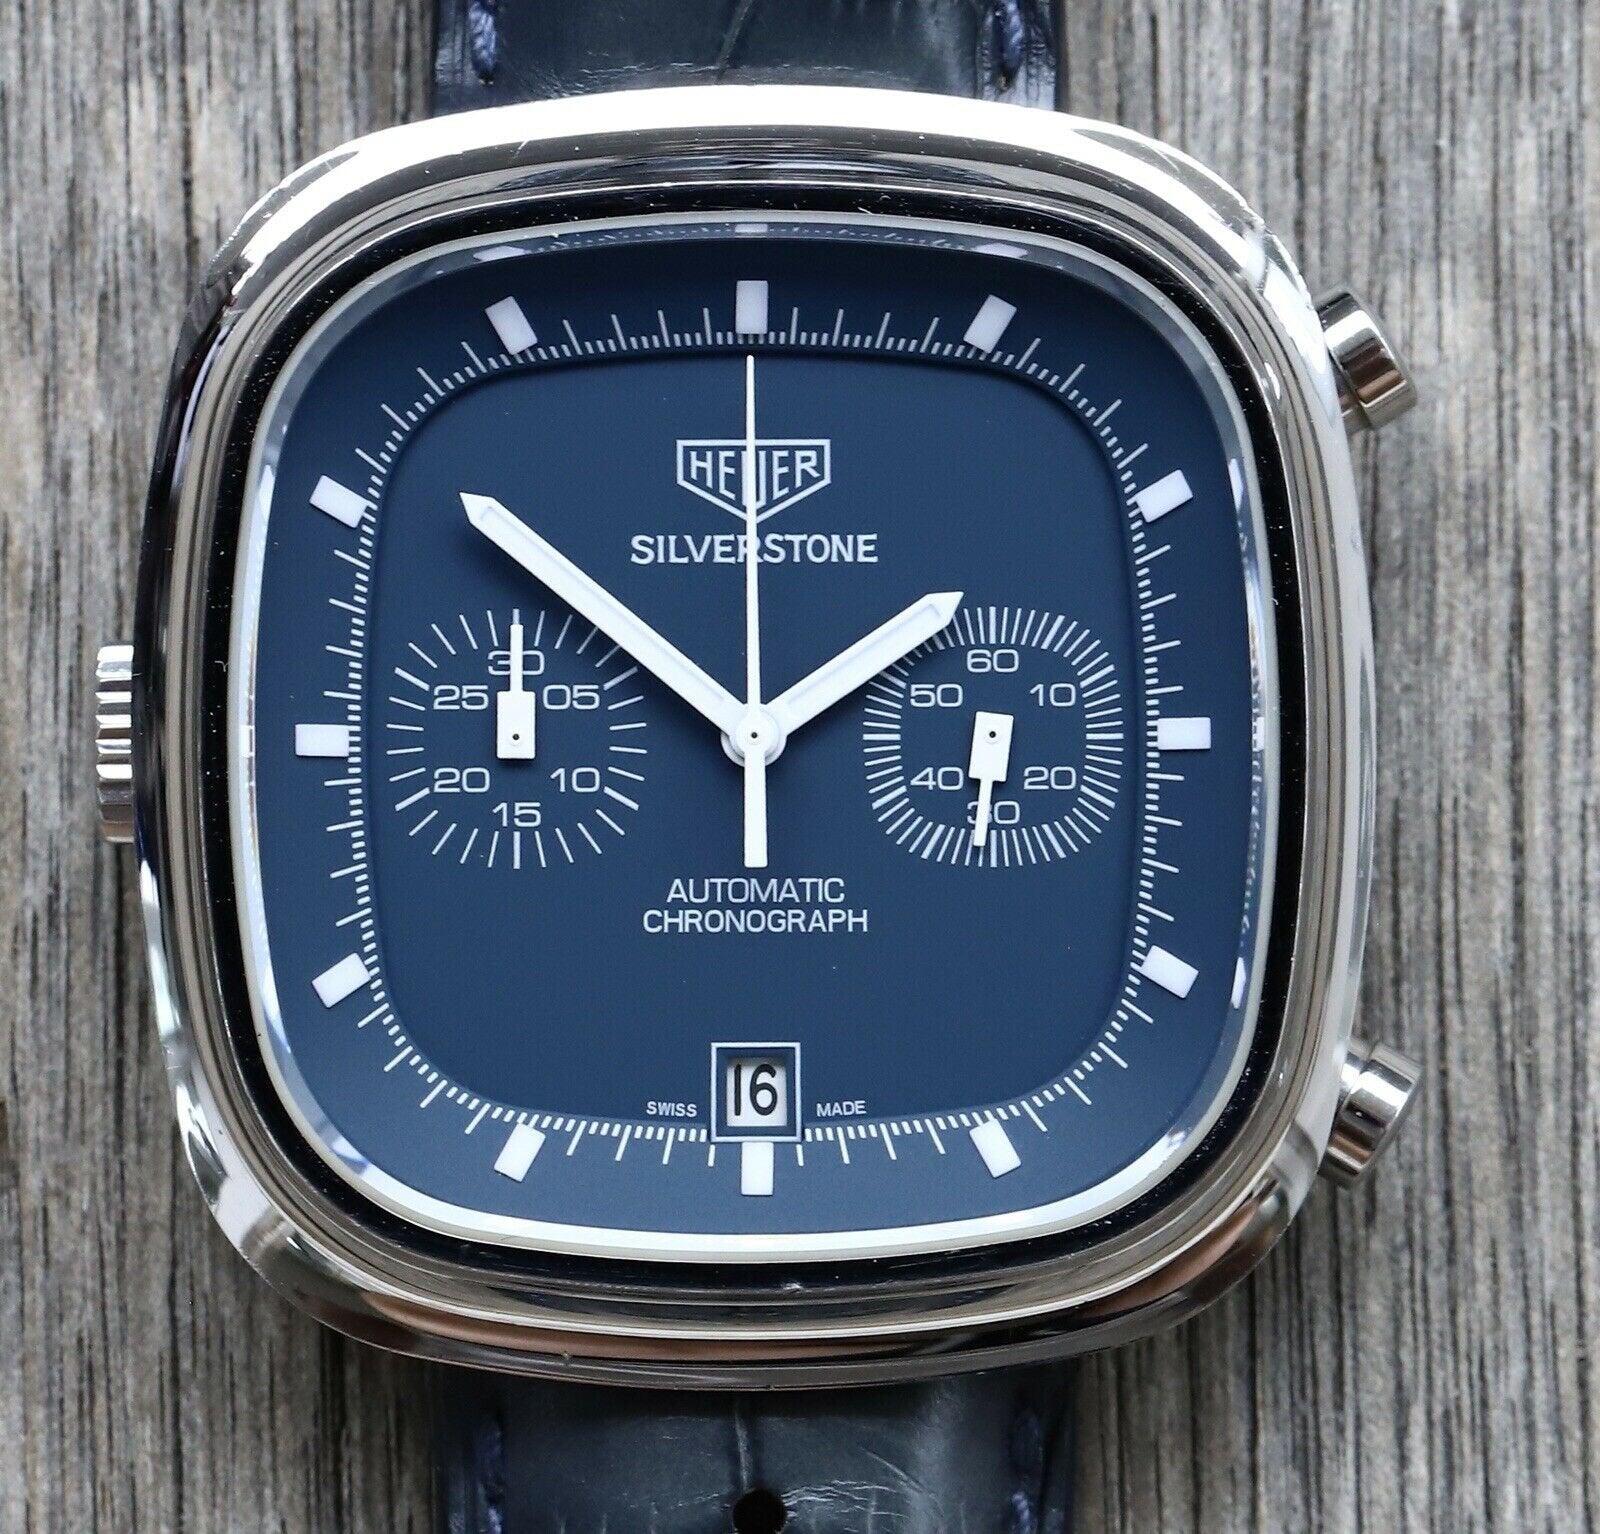 Tag_Heuer_Silverstone_Re-Issue_150th_Anniversary_Limited_Edition_Blue_CAM2110_Watch_Vault_01.jpg